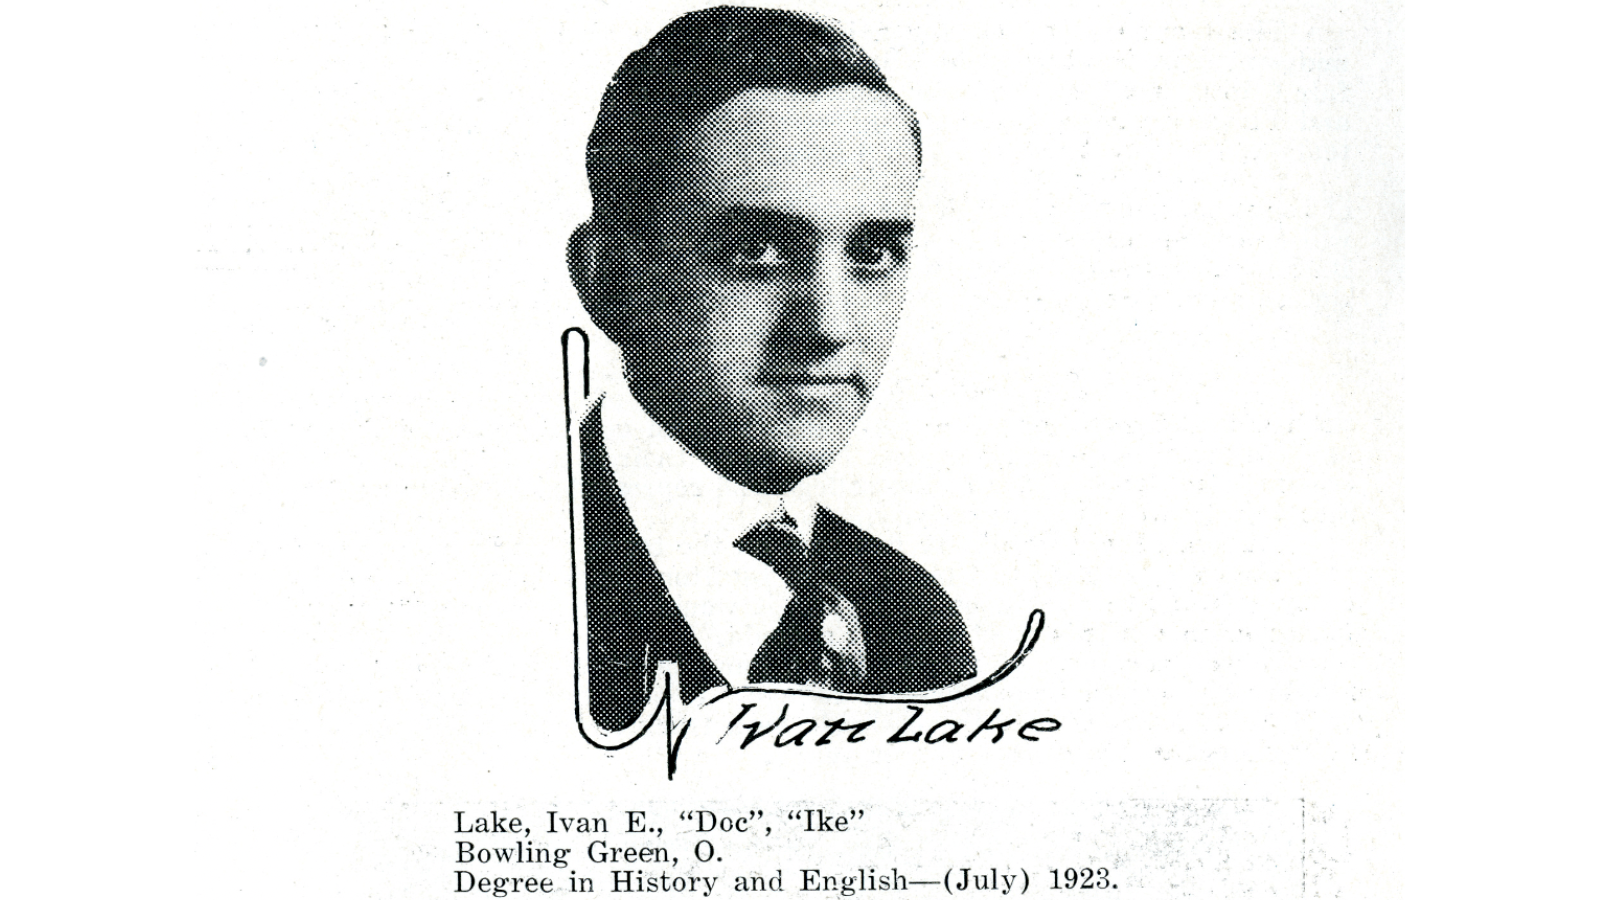 Ivan Lake was a well-rounded student known as "Mr. B-G" for his extensive involvement with the University He graduated from BGSU in July 1923. 